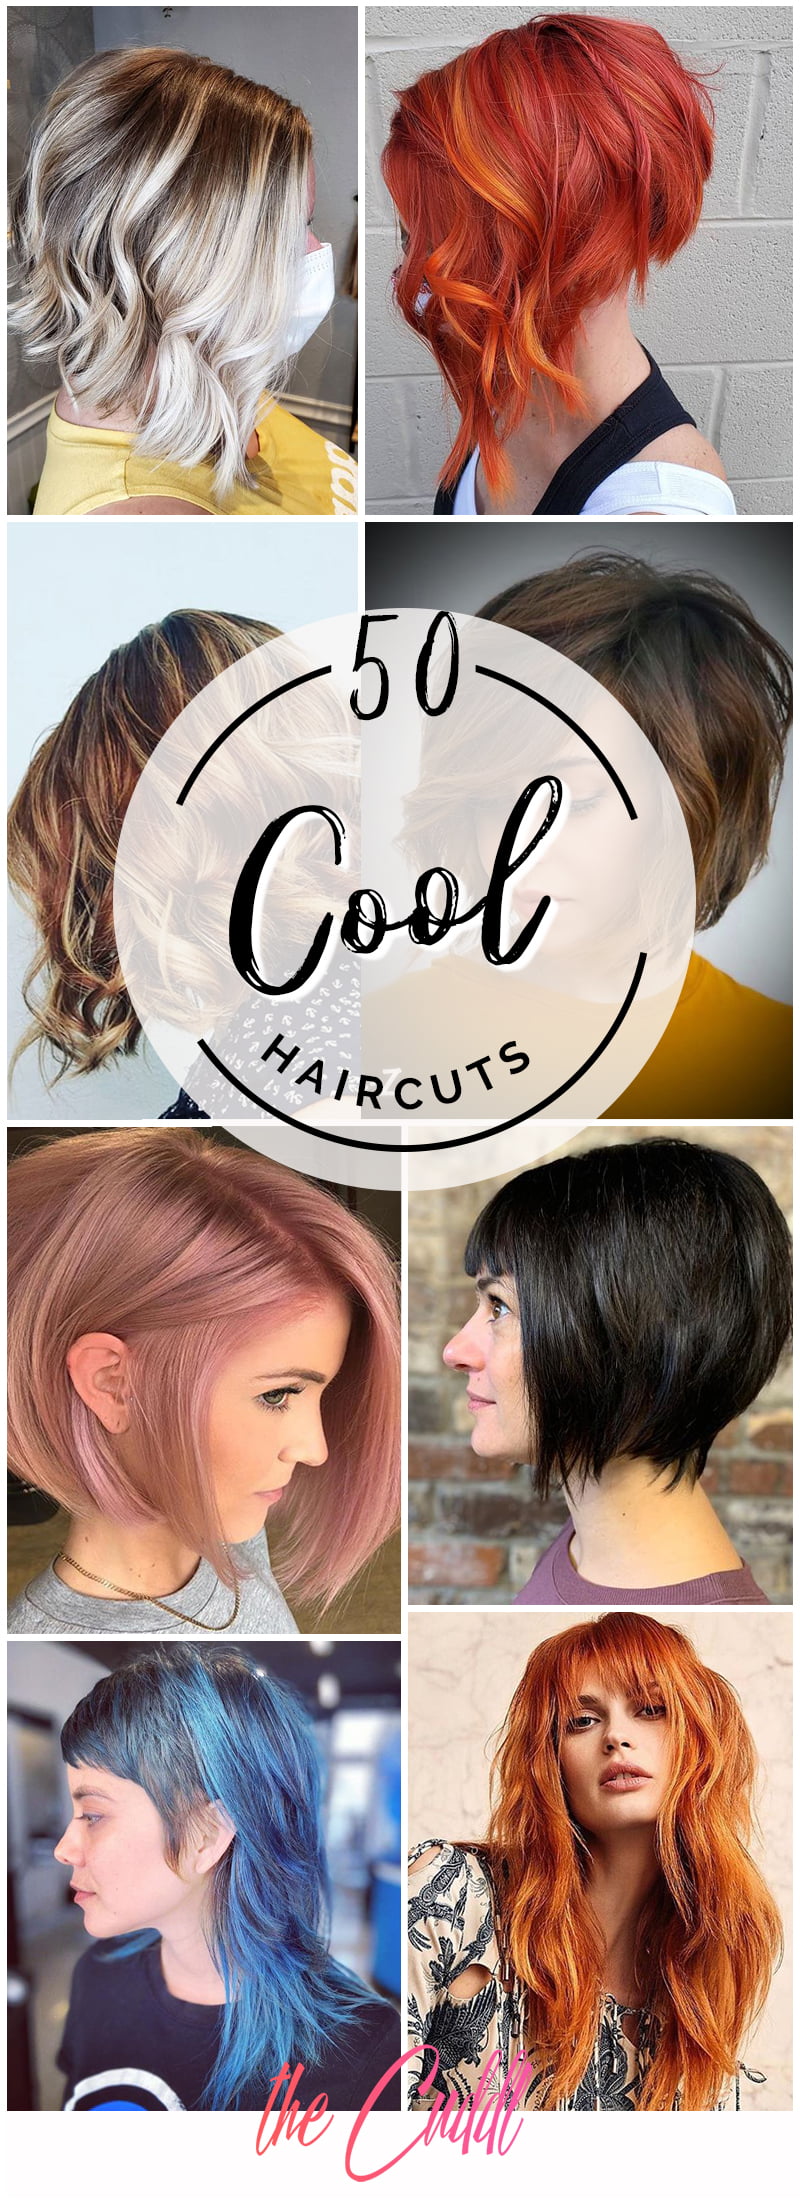 Cool Haircuts for Women